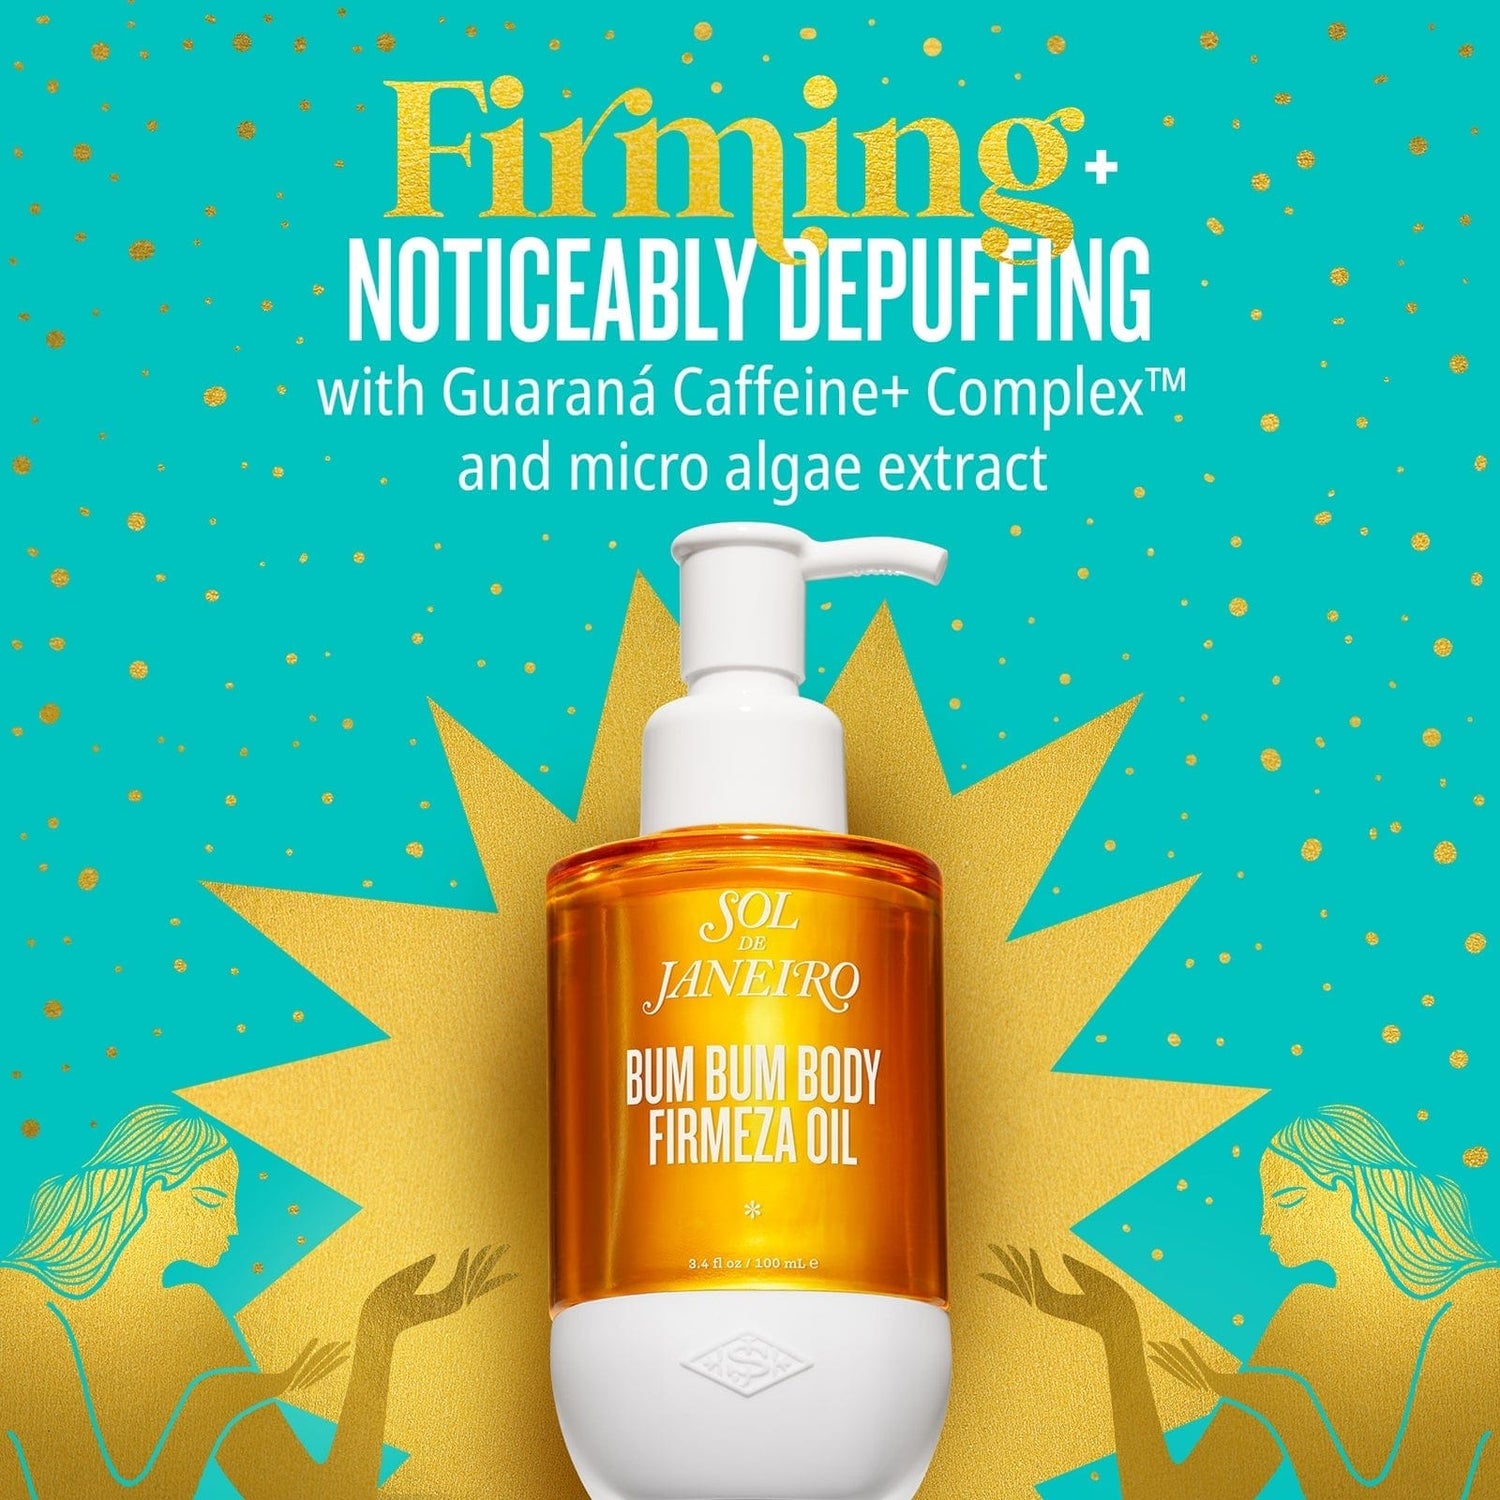 Firming + noticeably depuffing with guarana caffeine + complex and micro algae extract.